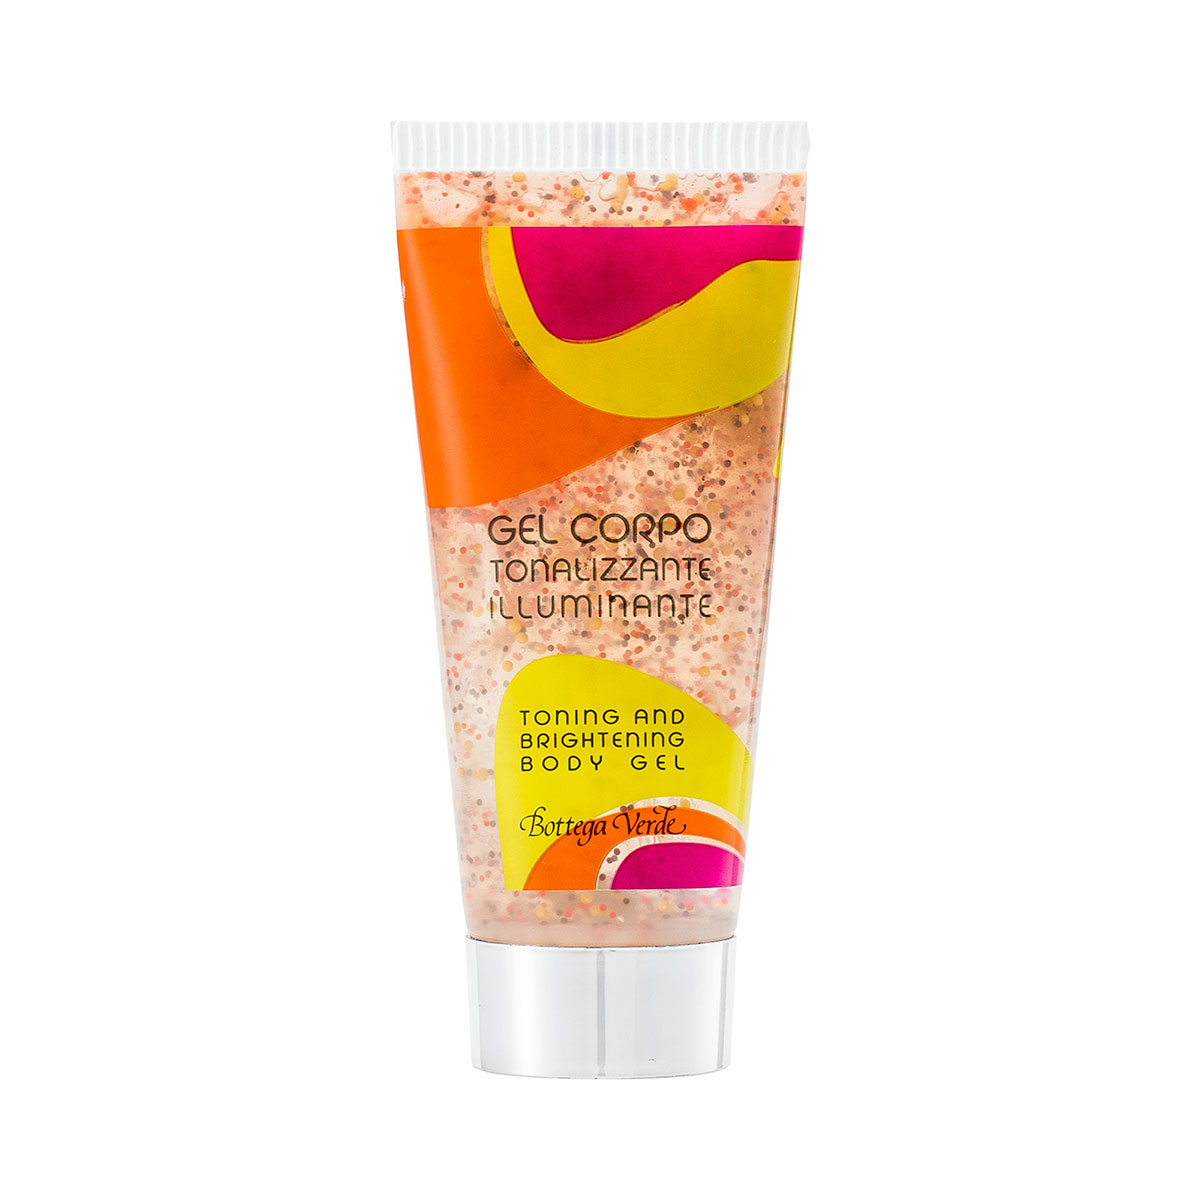 Toning and brightening body gel with Coconut water (40 ml)